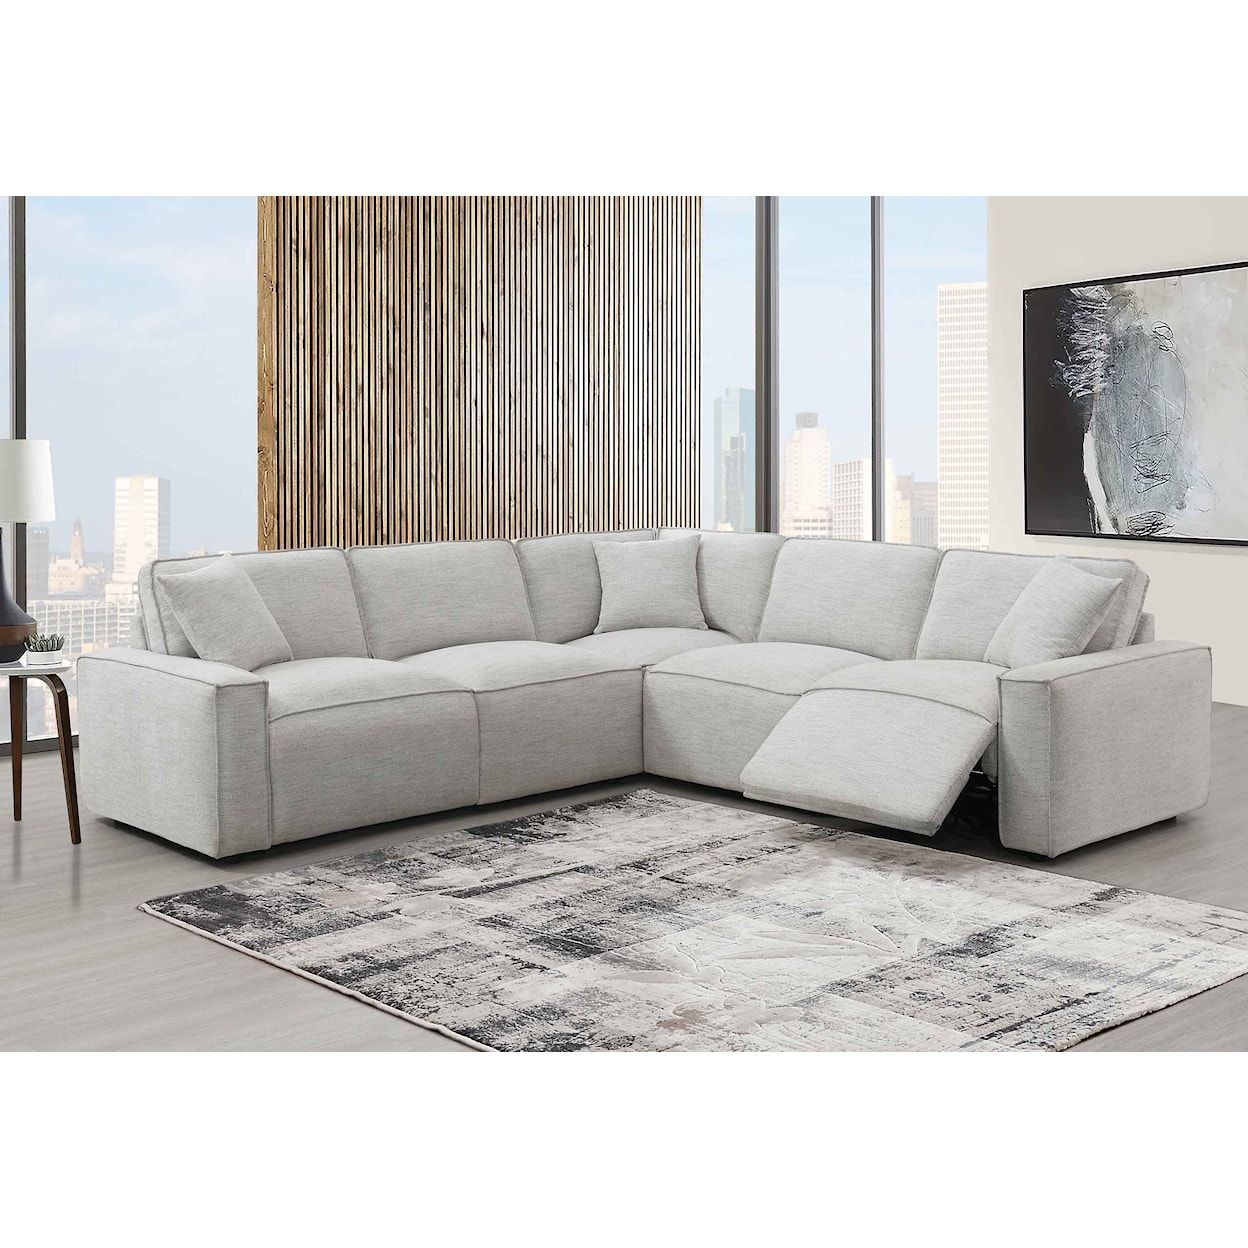 Global Furniture Albo ALBO SAND 3 PIECE SECTIONAL |